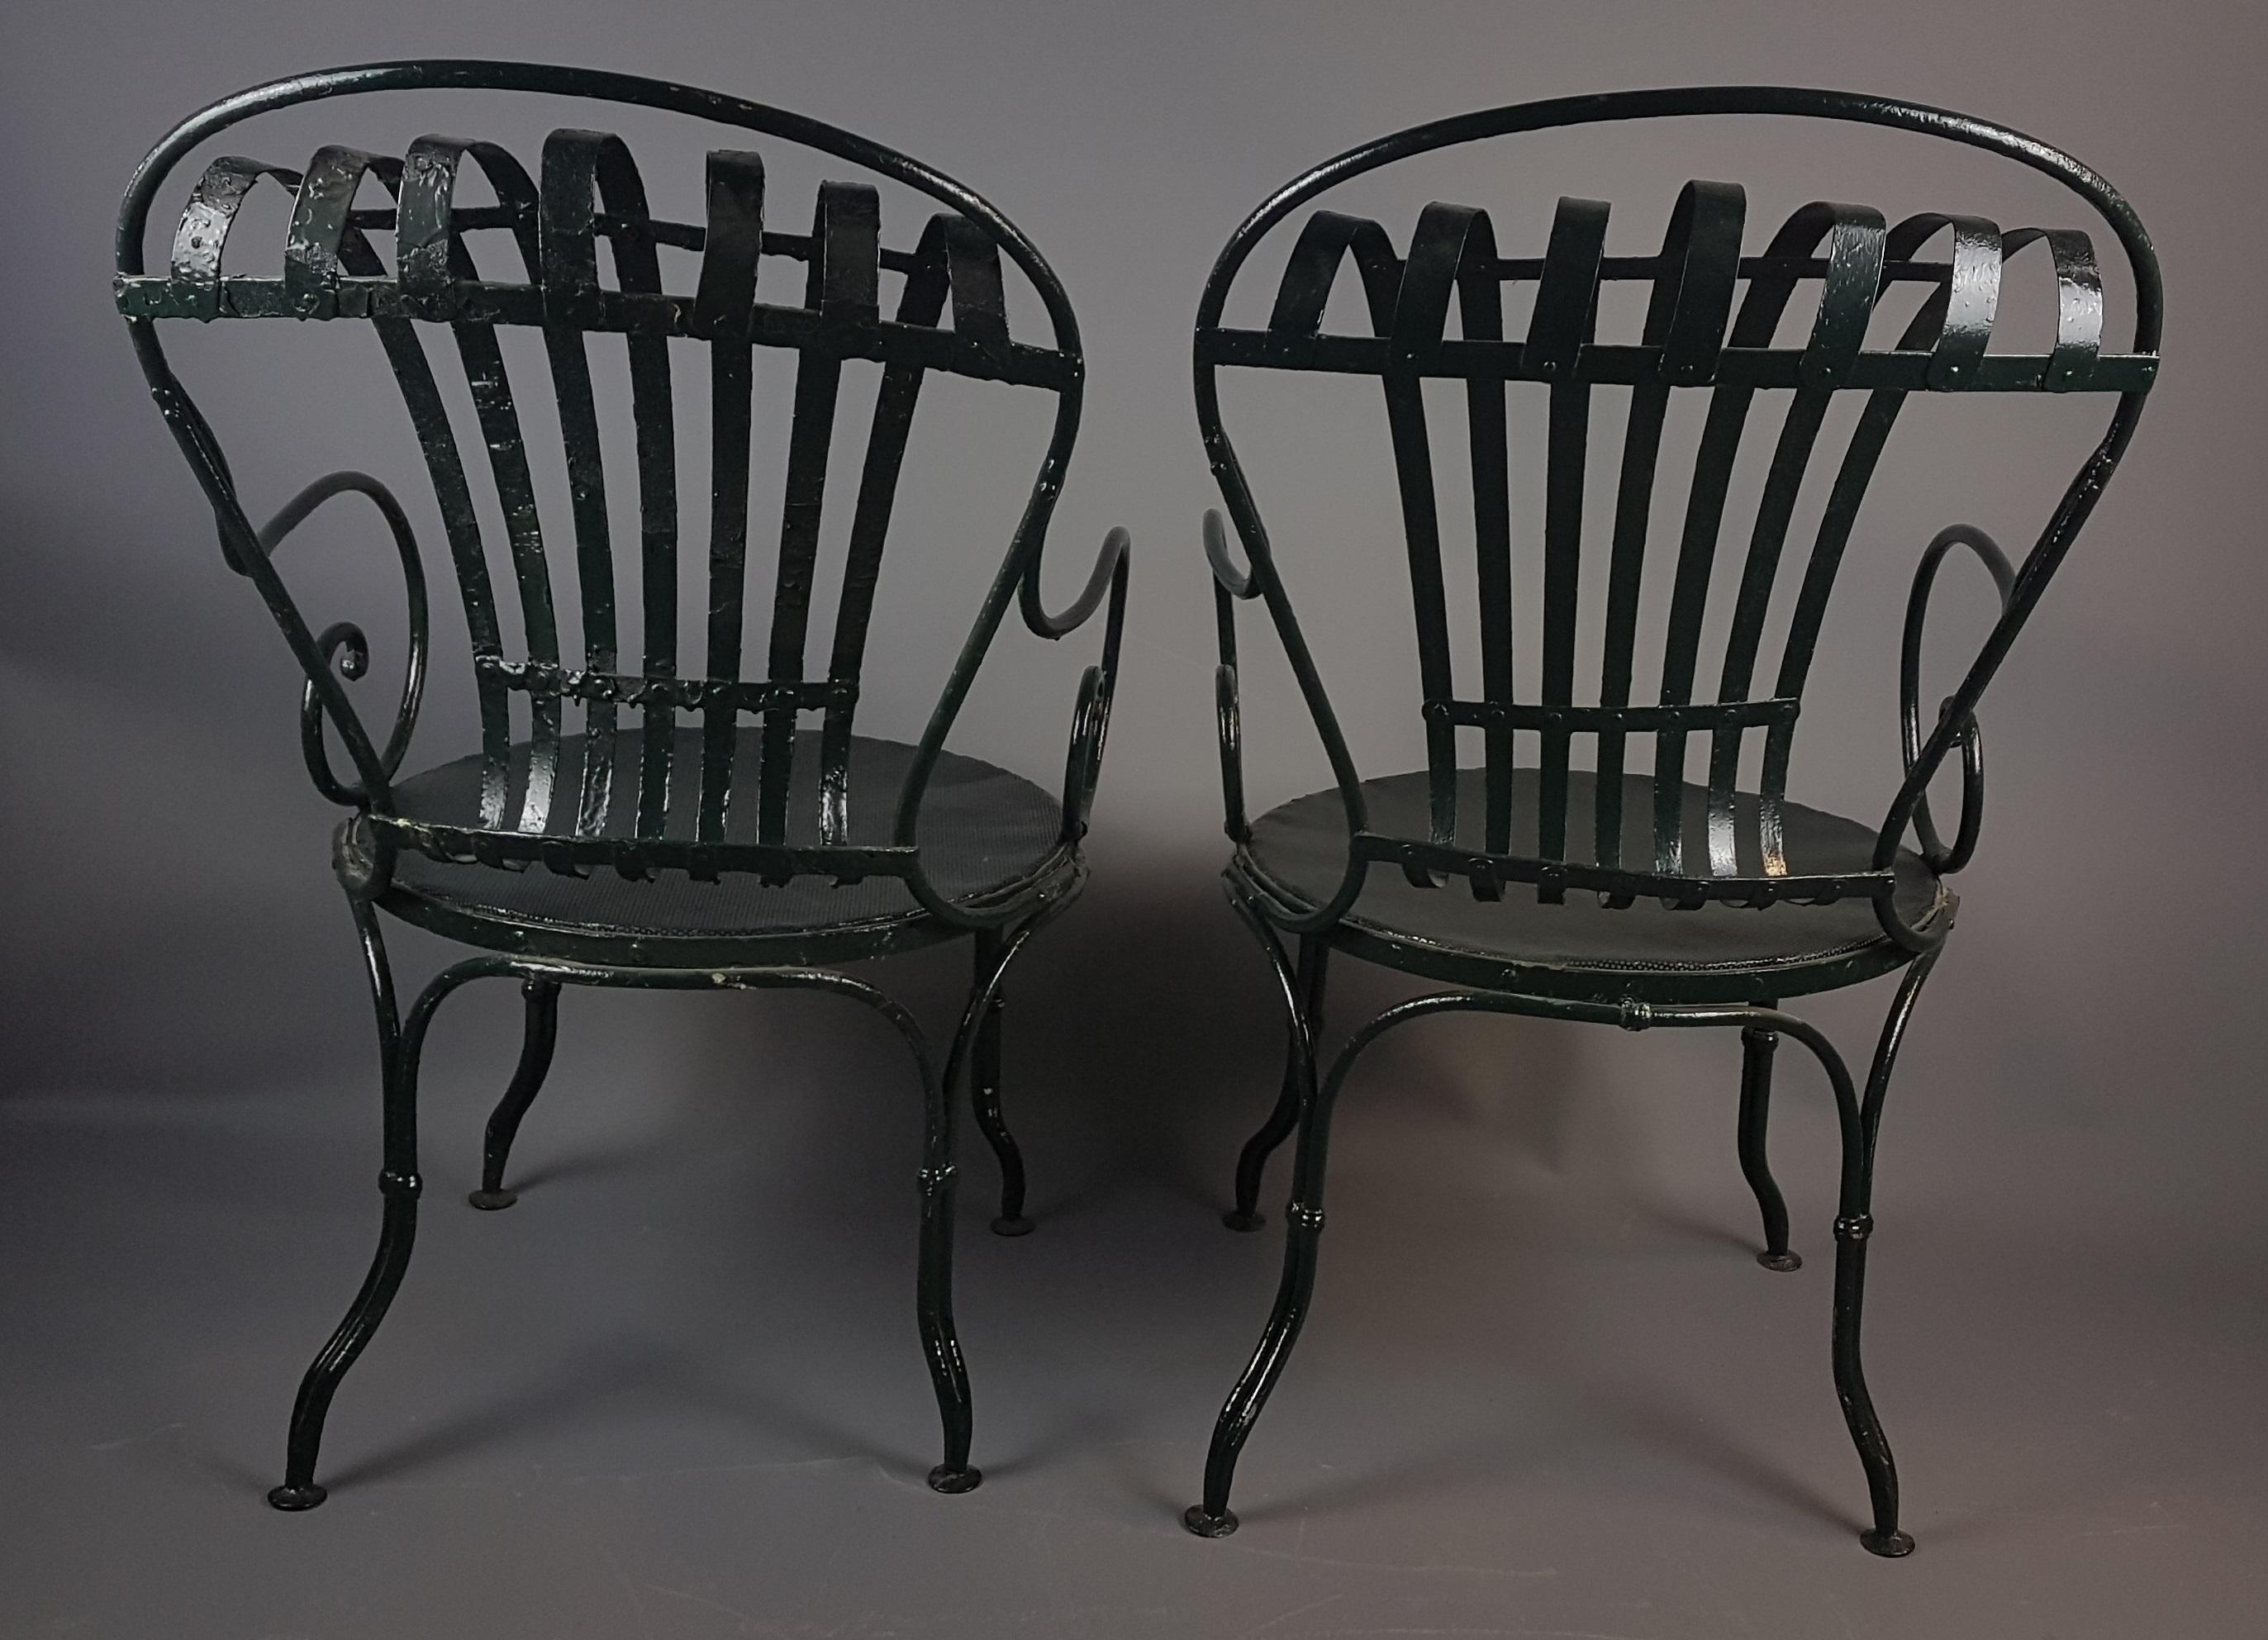 Pair of Green Francois Carre Chairs Designed by Le Corbusier In Good Condition For Sale In Bodicote, Oxfordshire